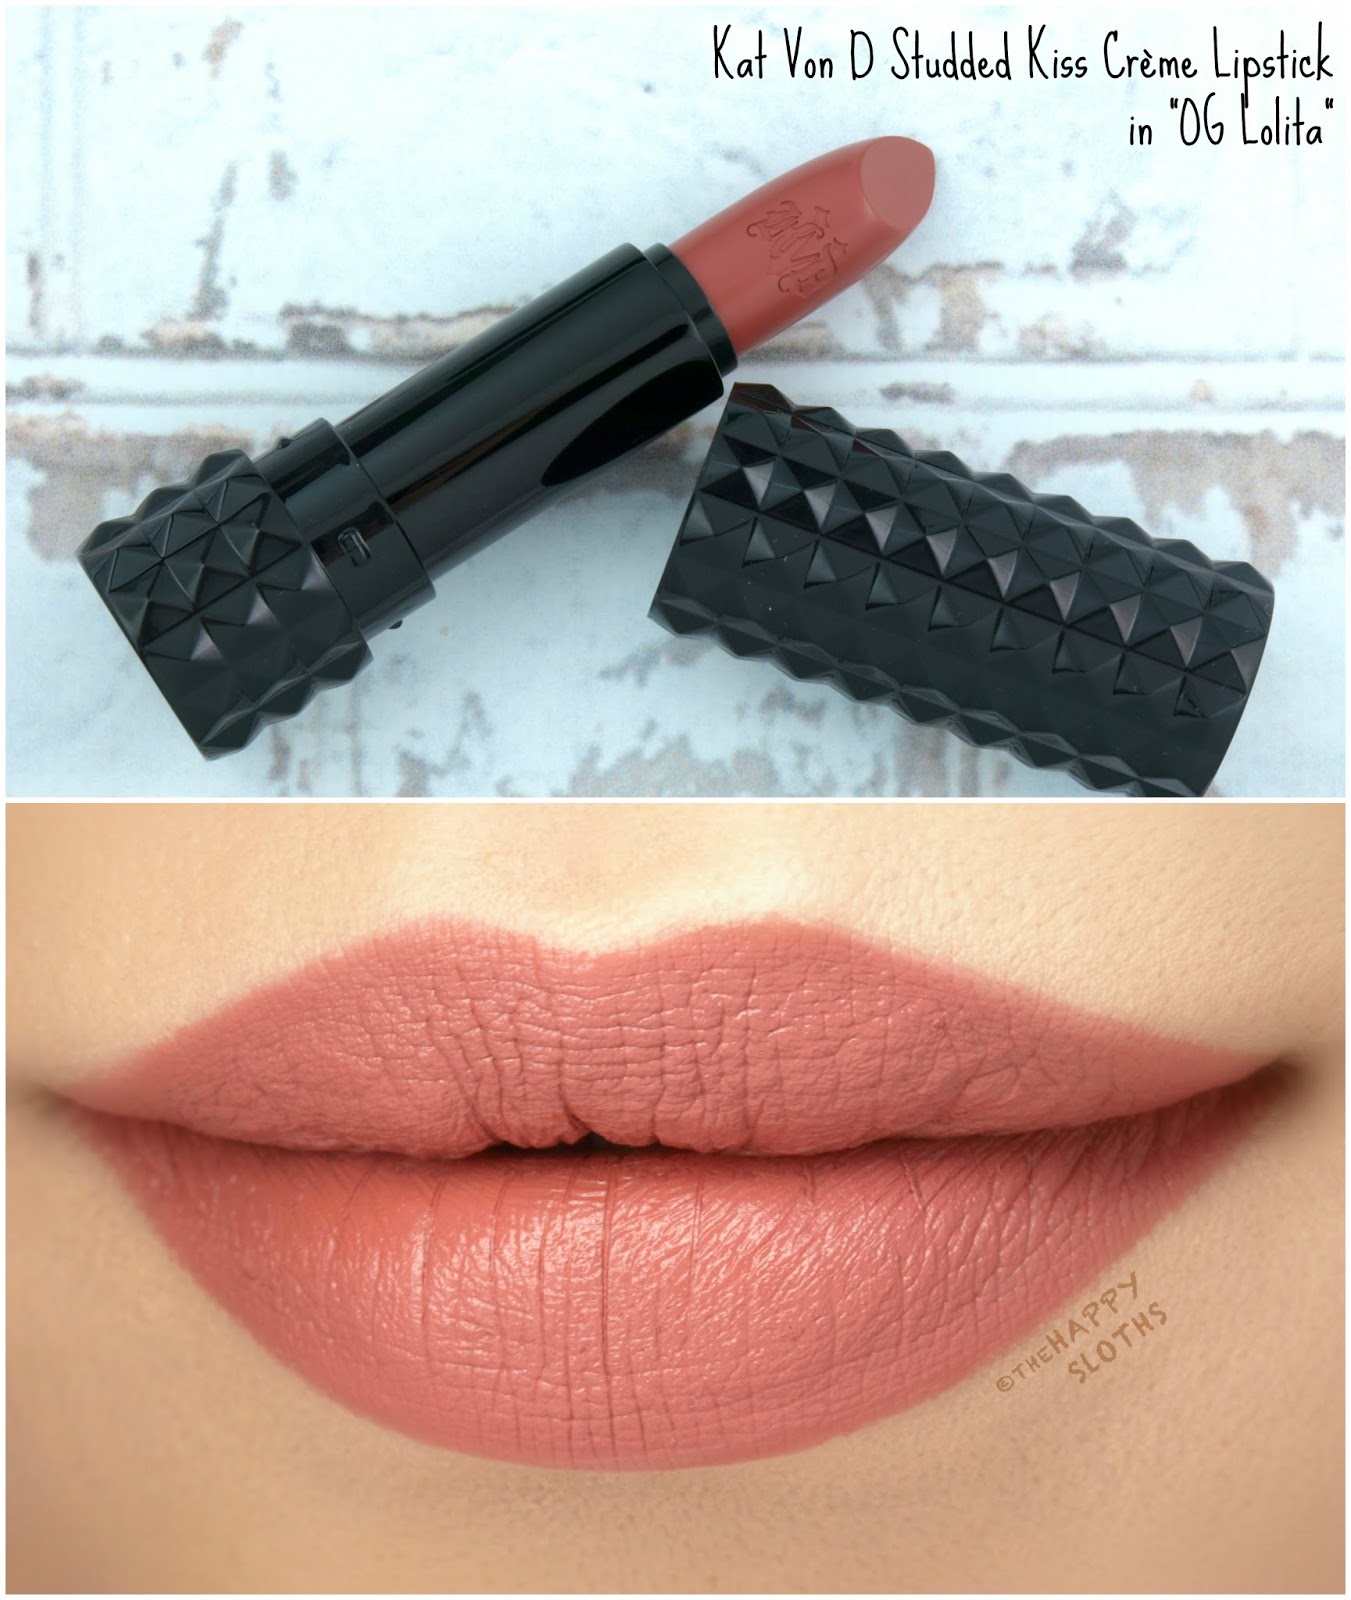 Penneven Frastøde forholdsord Kat Von D | *NEW* Studded Kiss Crème Lipstick: Review and Swatches | The  Happy Sloths: Beauty, Makeup, and Skincare Blog with Reviews and Swatches